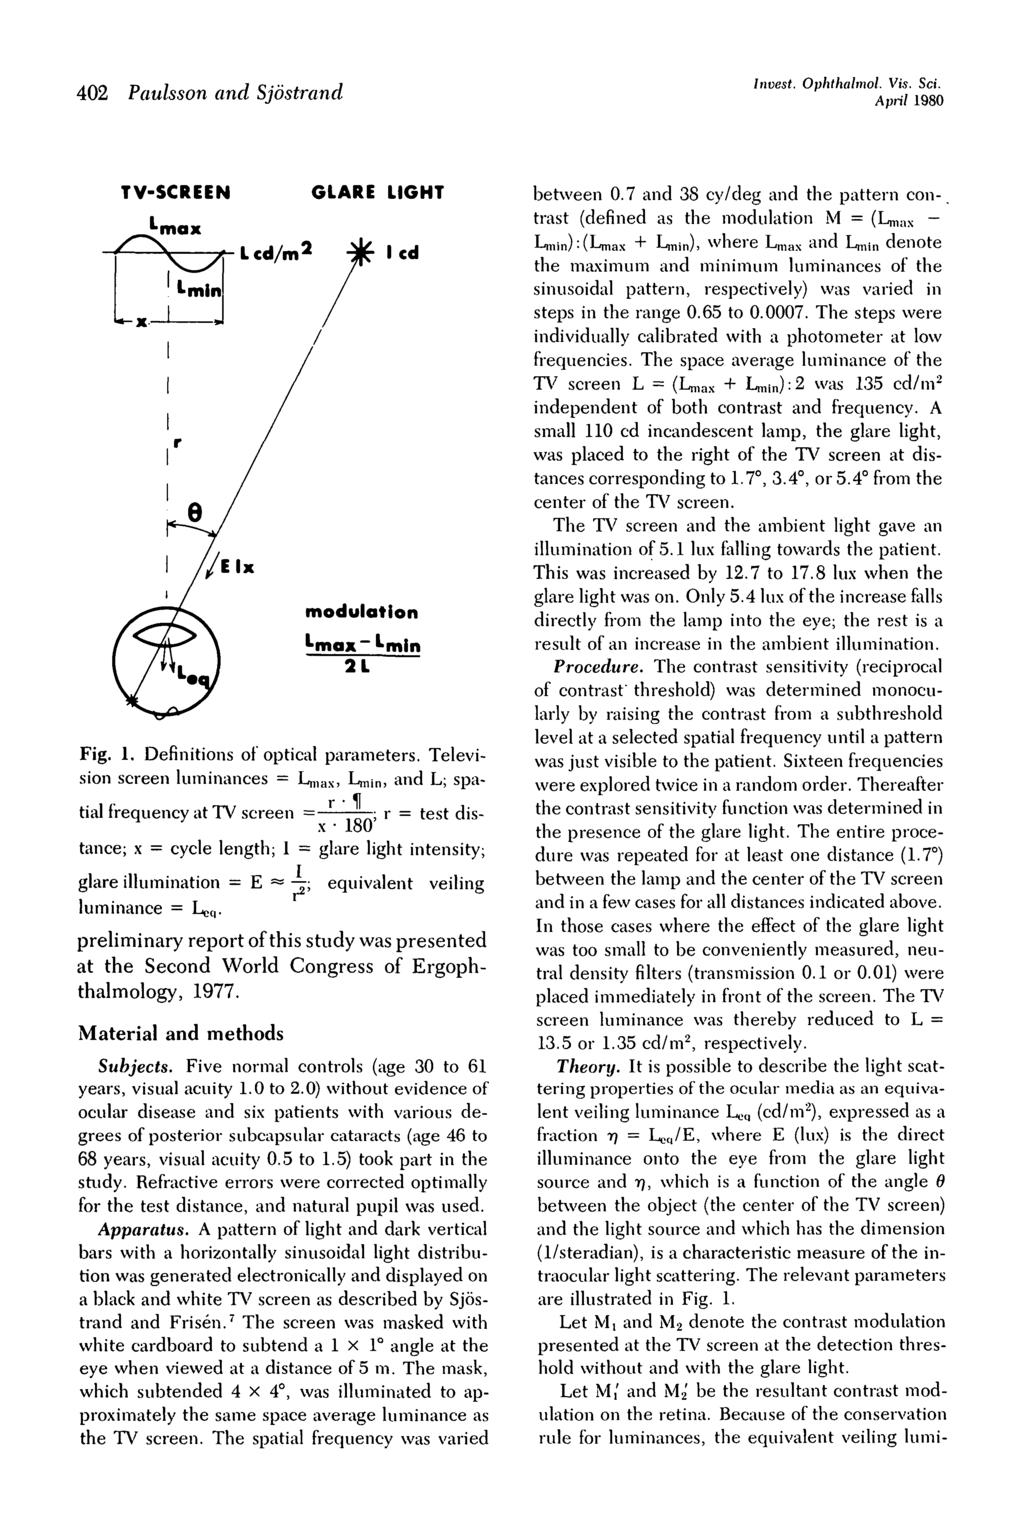 402 Paulsson and Sjostrand Invest. Ophthalmol. Vis. Sci. April 1980 TV-SCREEN L. *max GLARE LIGHT Fig. 1. Definitions of optical parameters.